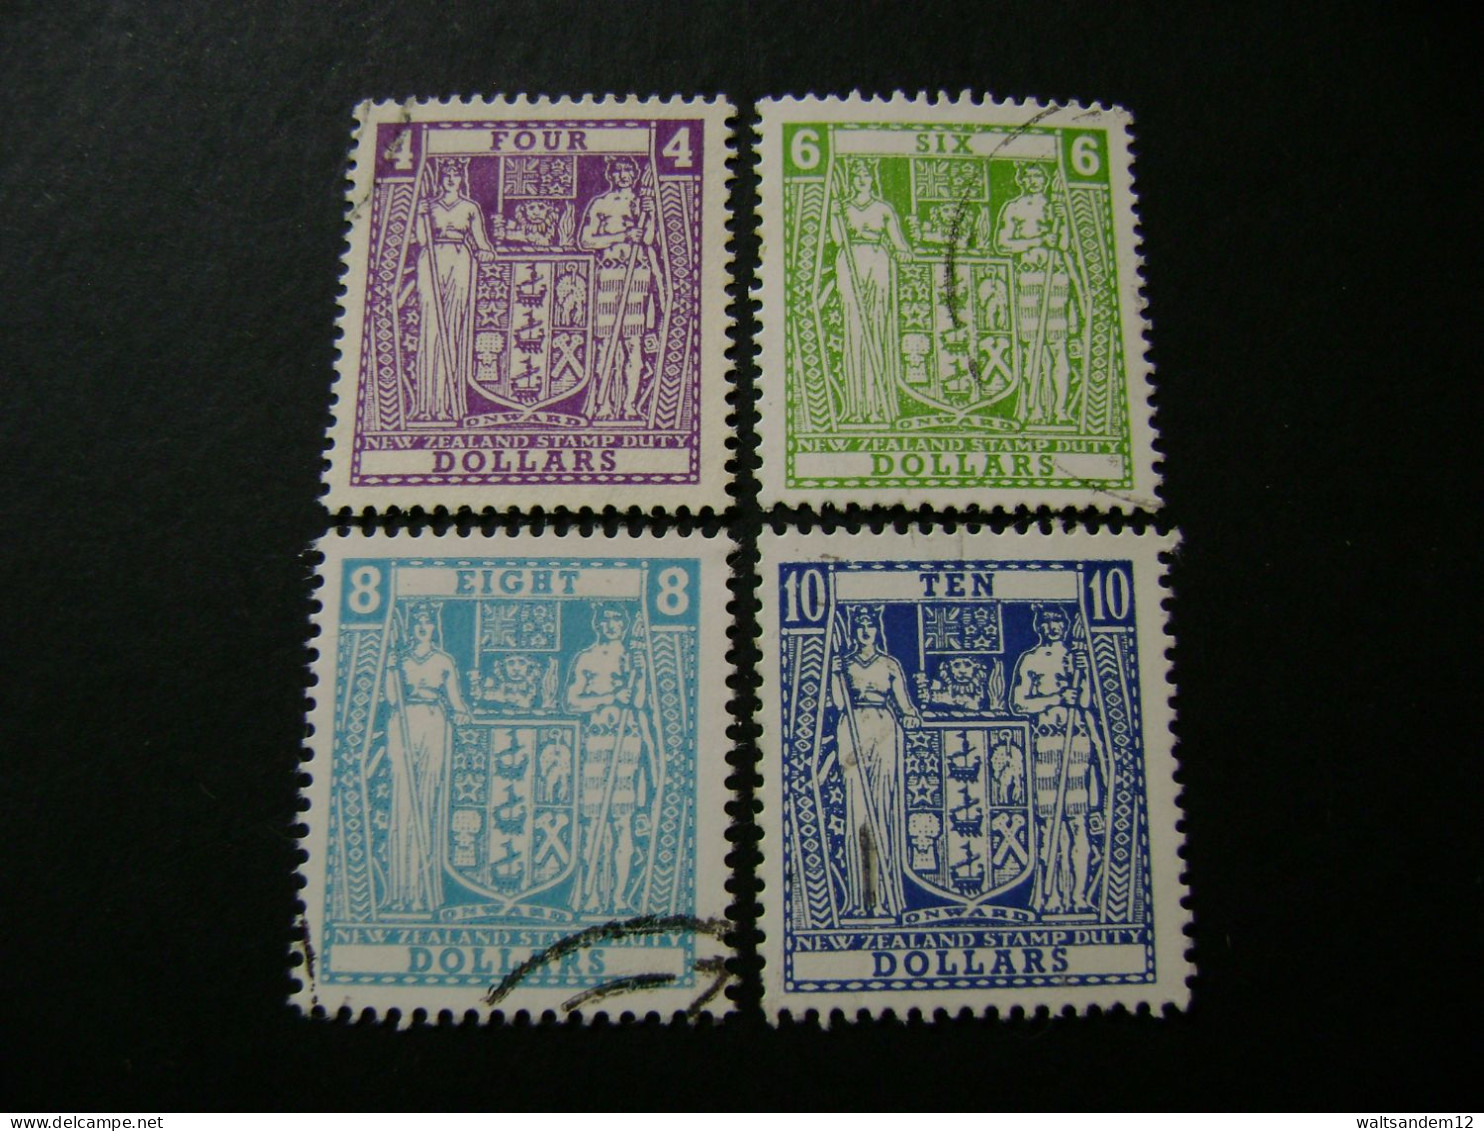 New Zealand 1967 Decimal Arms $4, $6, $8, $10 Definitives (SG F219-F222) - Used - Post-fiscaal